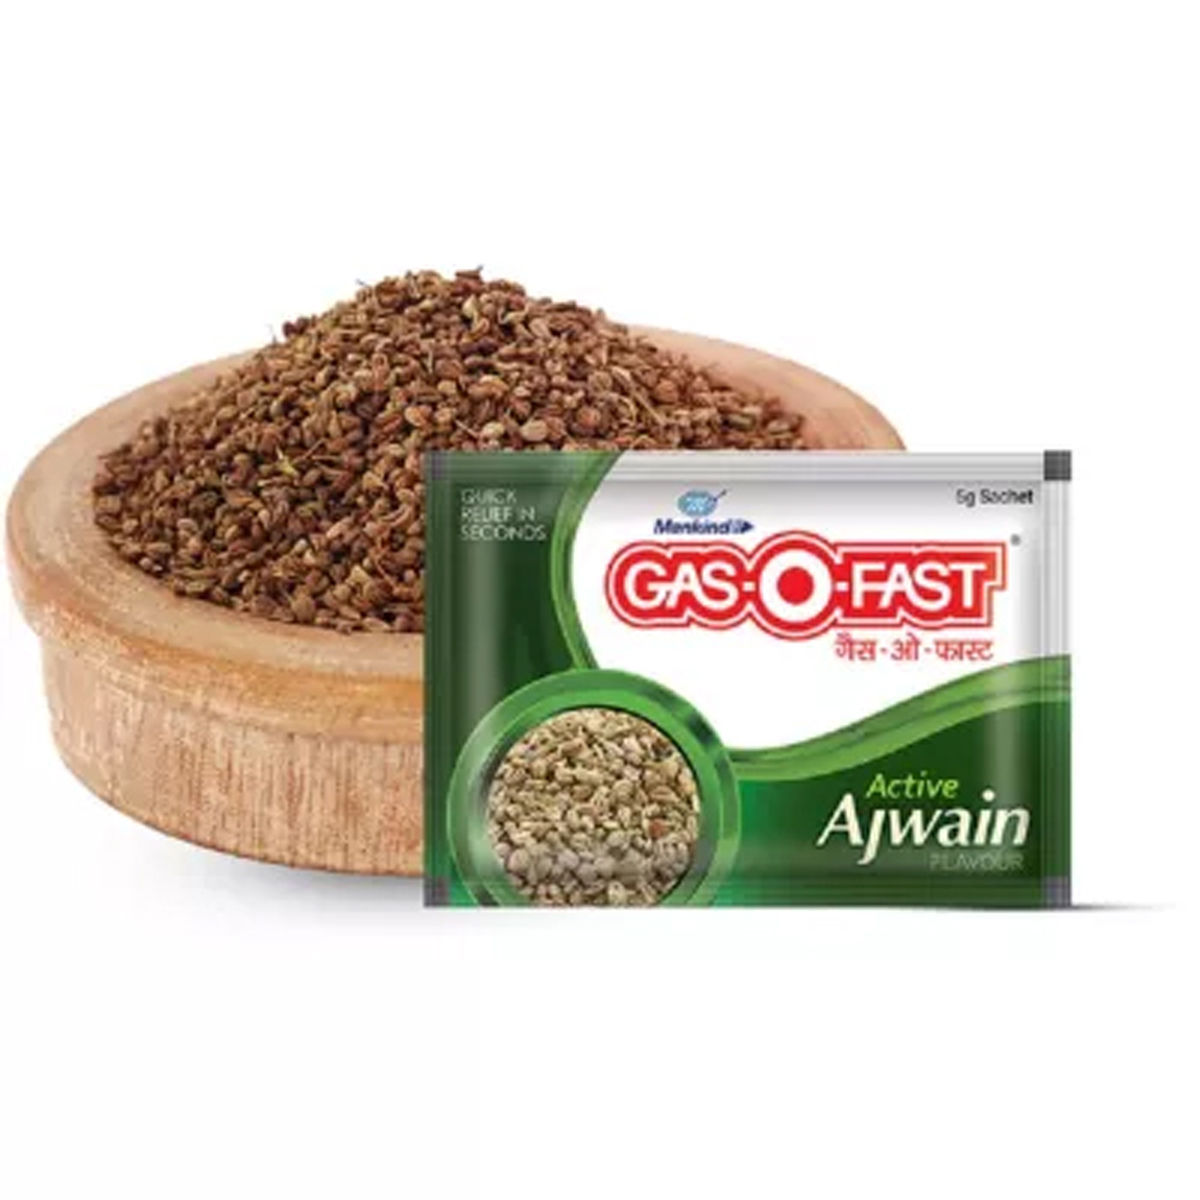 Gas-O-Fast Active Ajwain Sachet, 5 gm, Pack of 1 